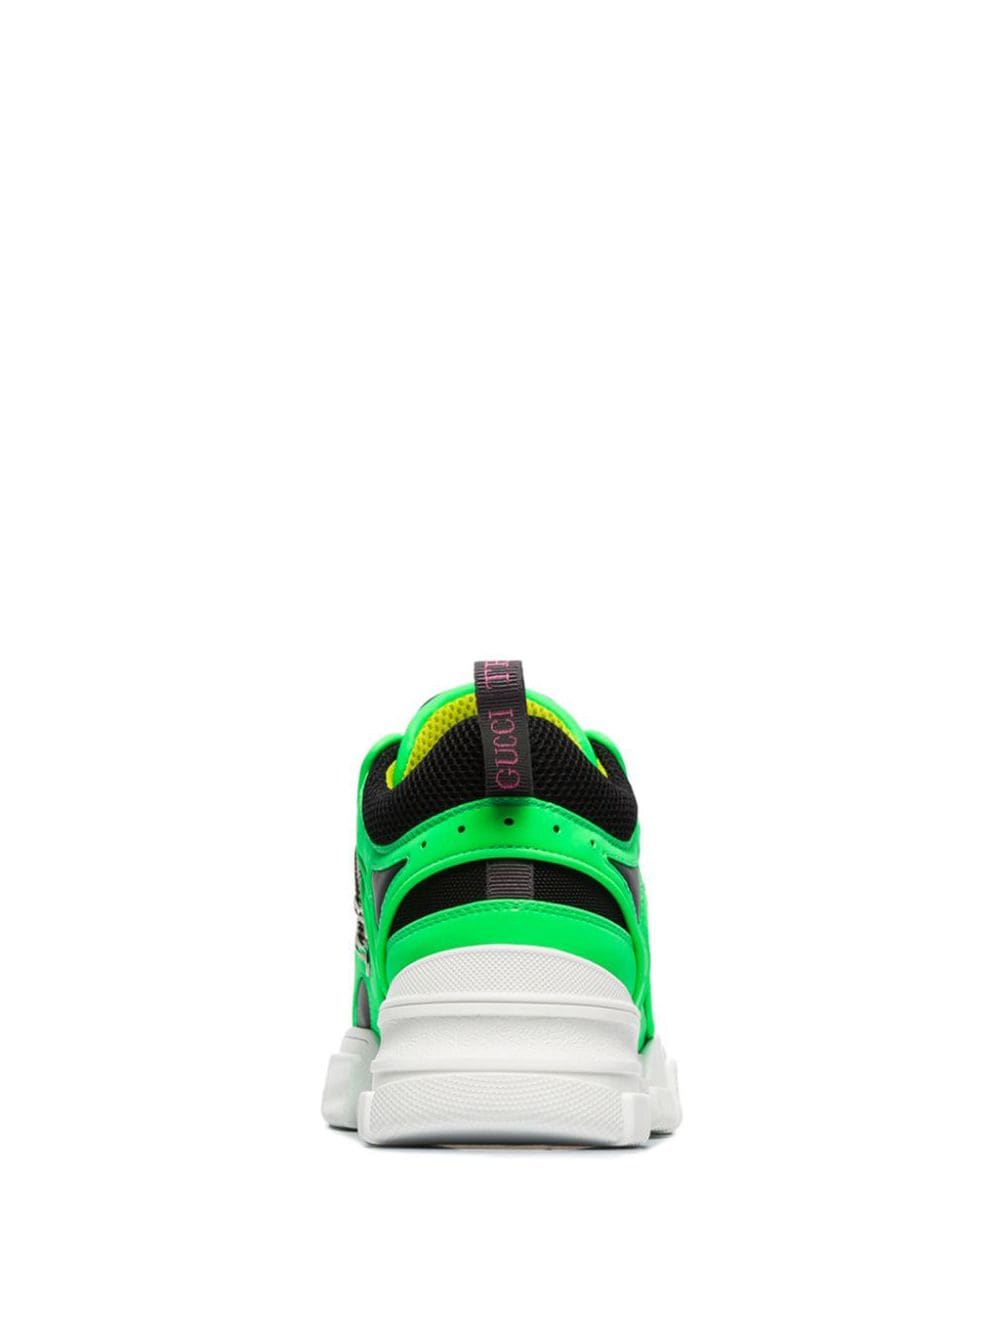 Gucci Green And Black Flashtrek Leather And Mesh Sneakers - Farfetch